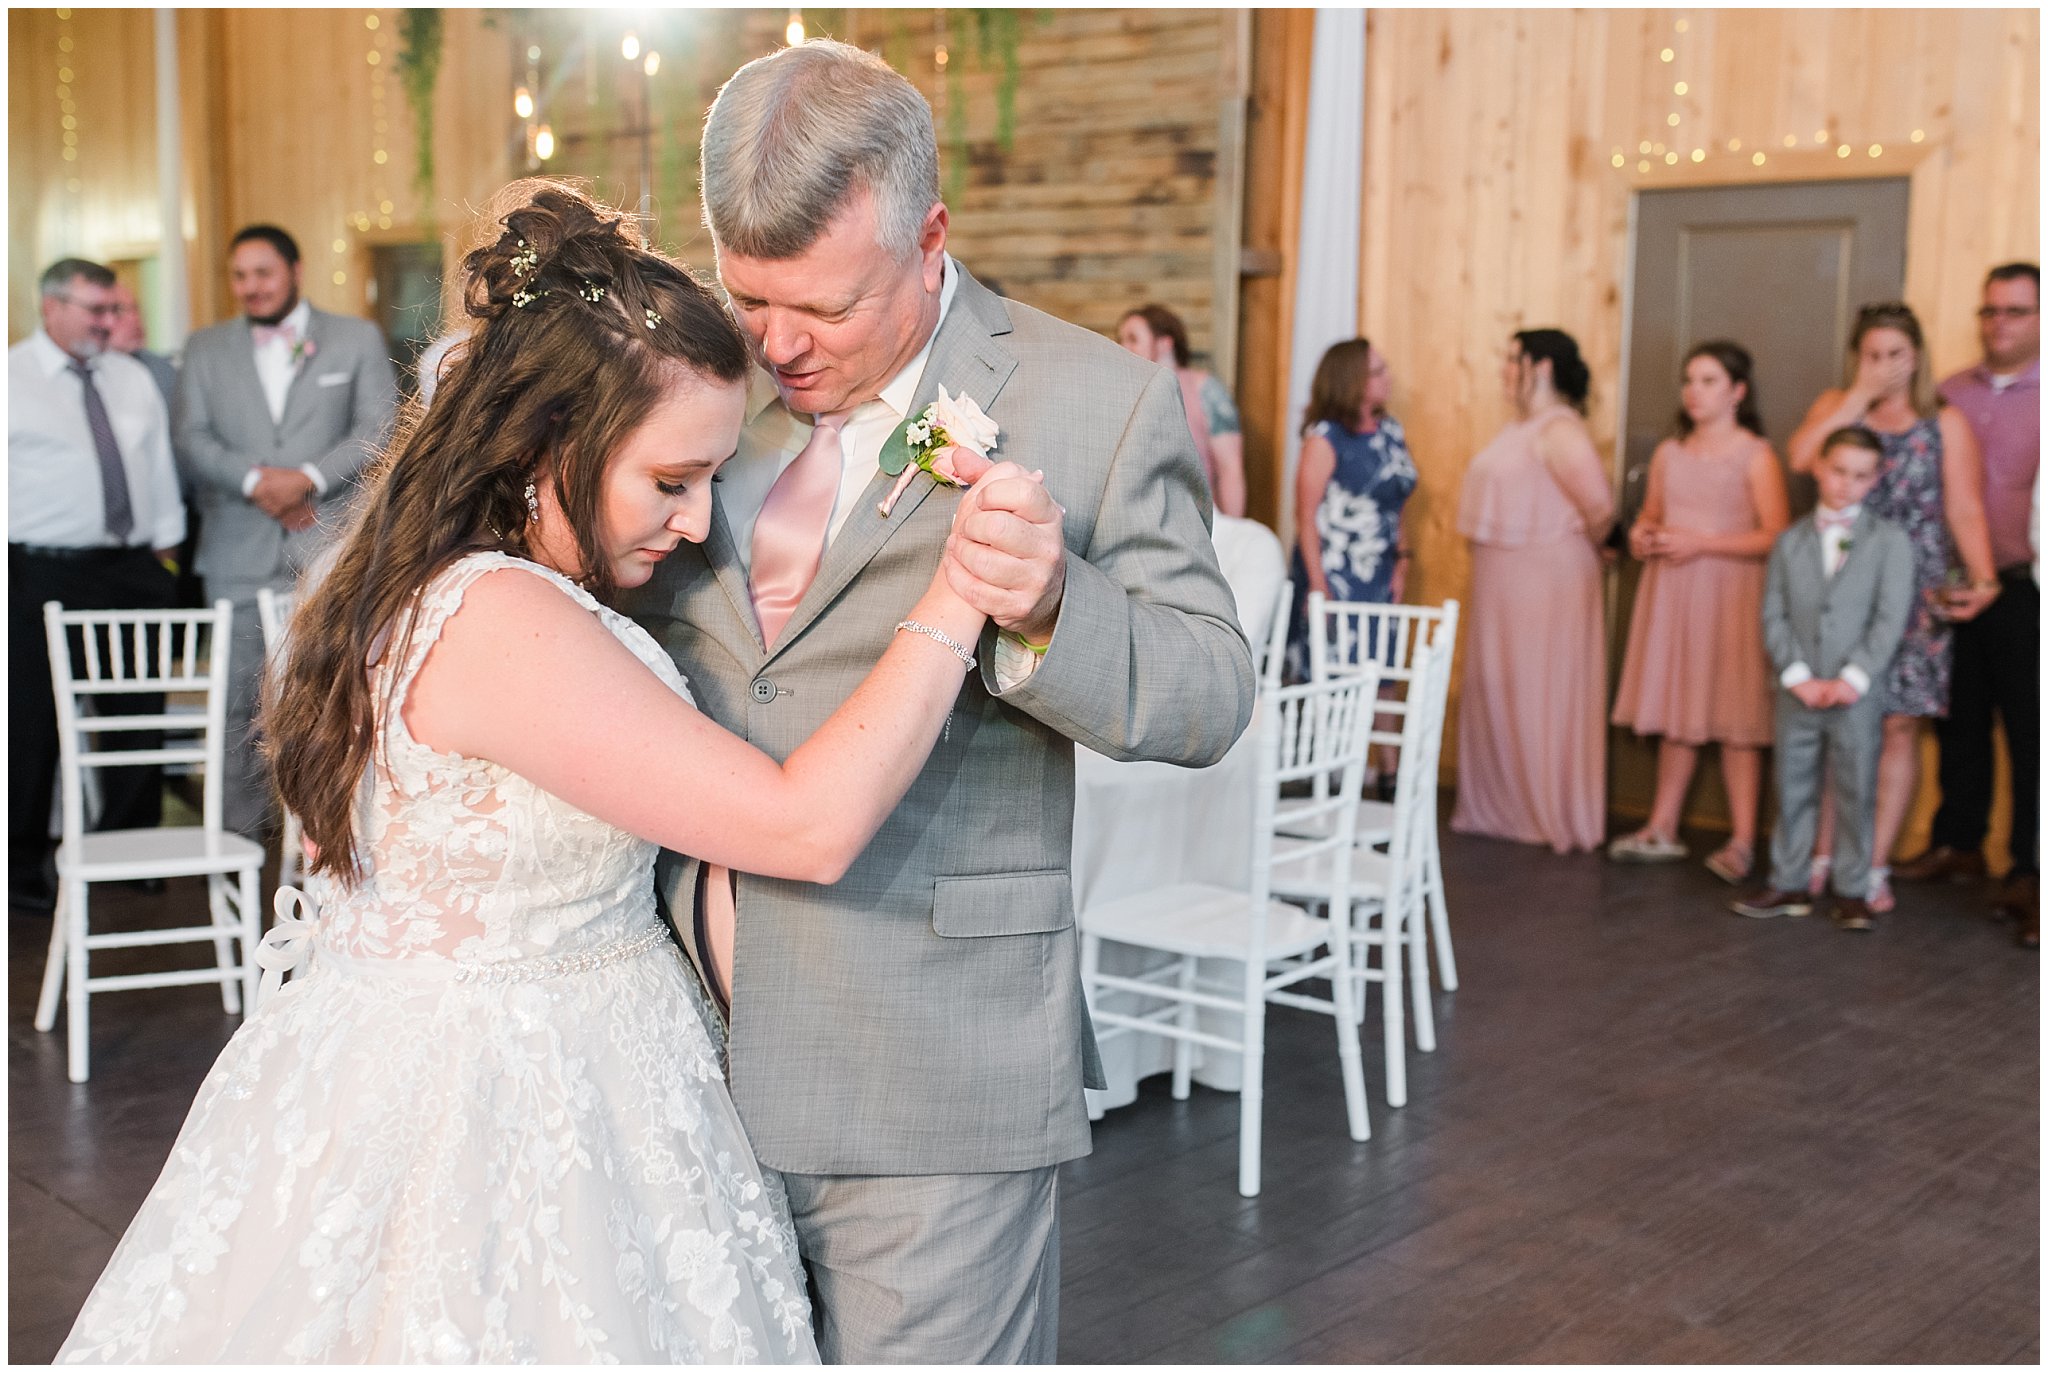 Father daughter dance in barn | Oak Hills Utah Dusty Rose and Gray Summer Wedding | Jessie and Dallin Photography